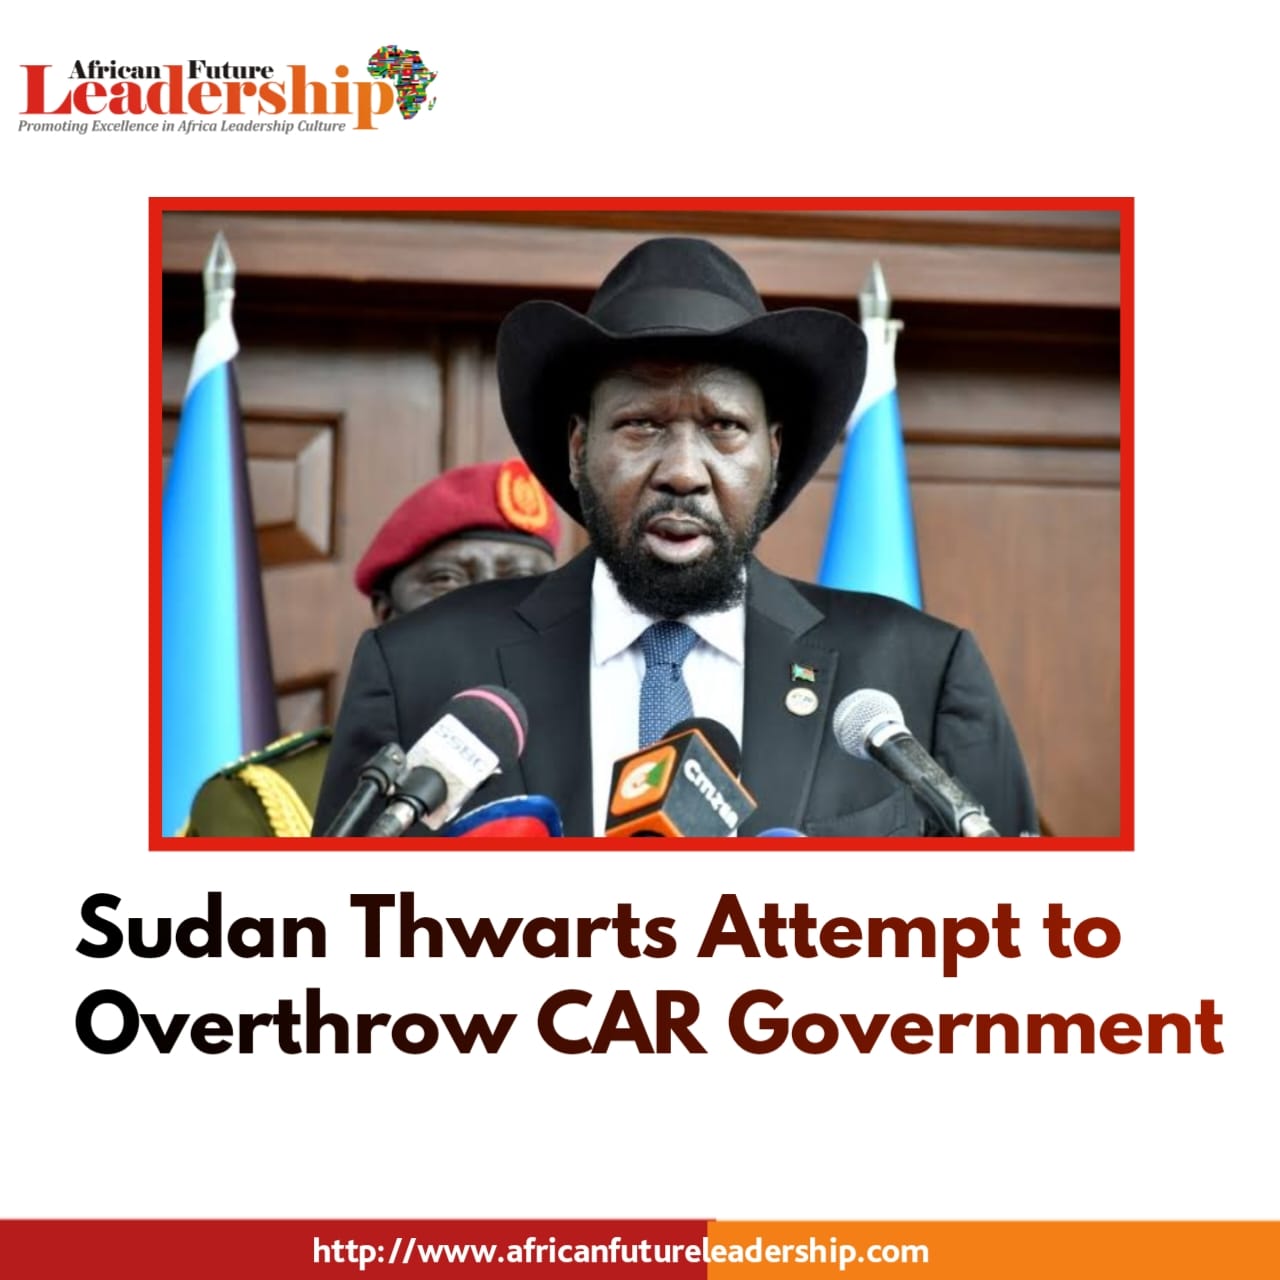 Sudan Thwarts Attempt to Overthrow CAR Government